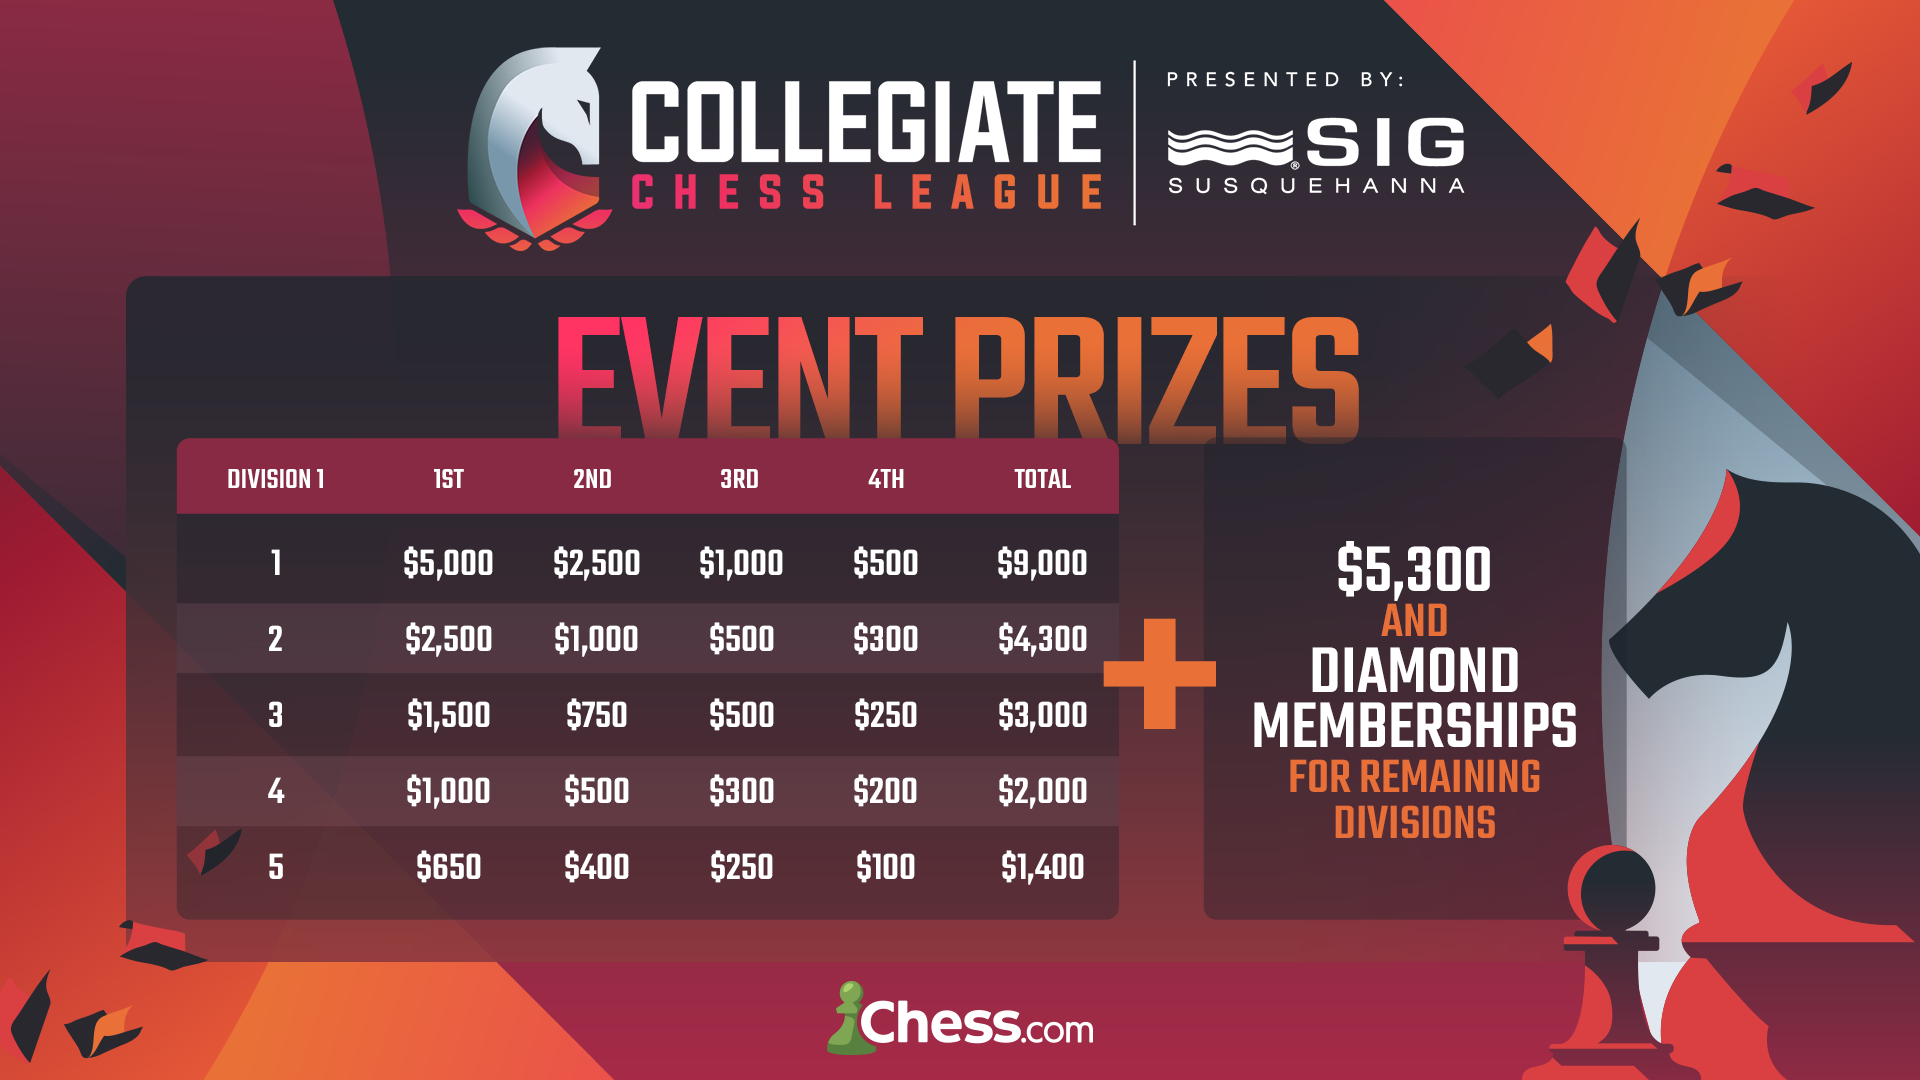 More than 100 universities from around the world took part in last year's Collegiate Chess League and this season's winners could win a first prize of $5,000 ©Chess.com